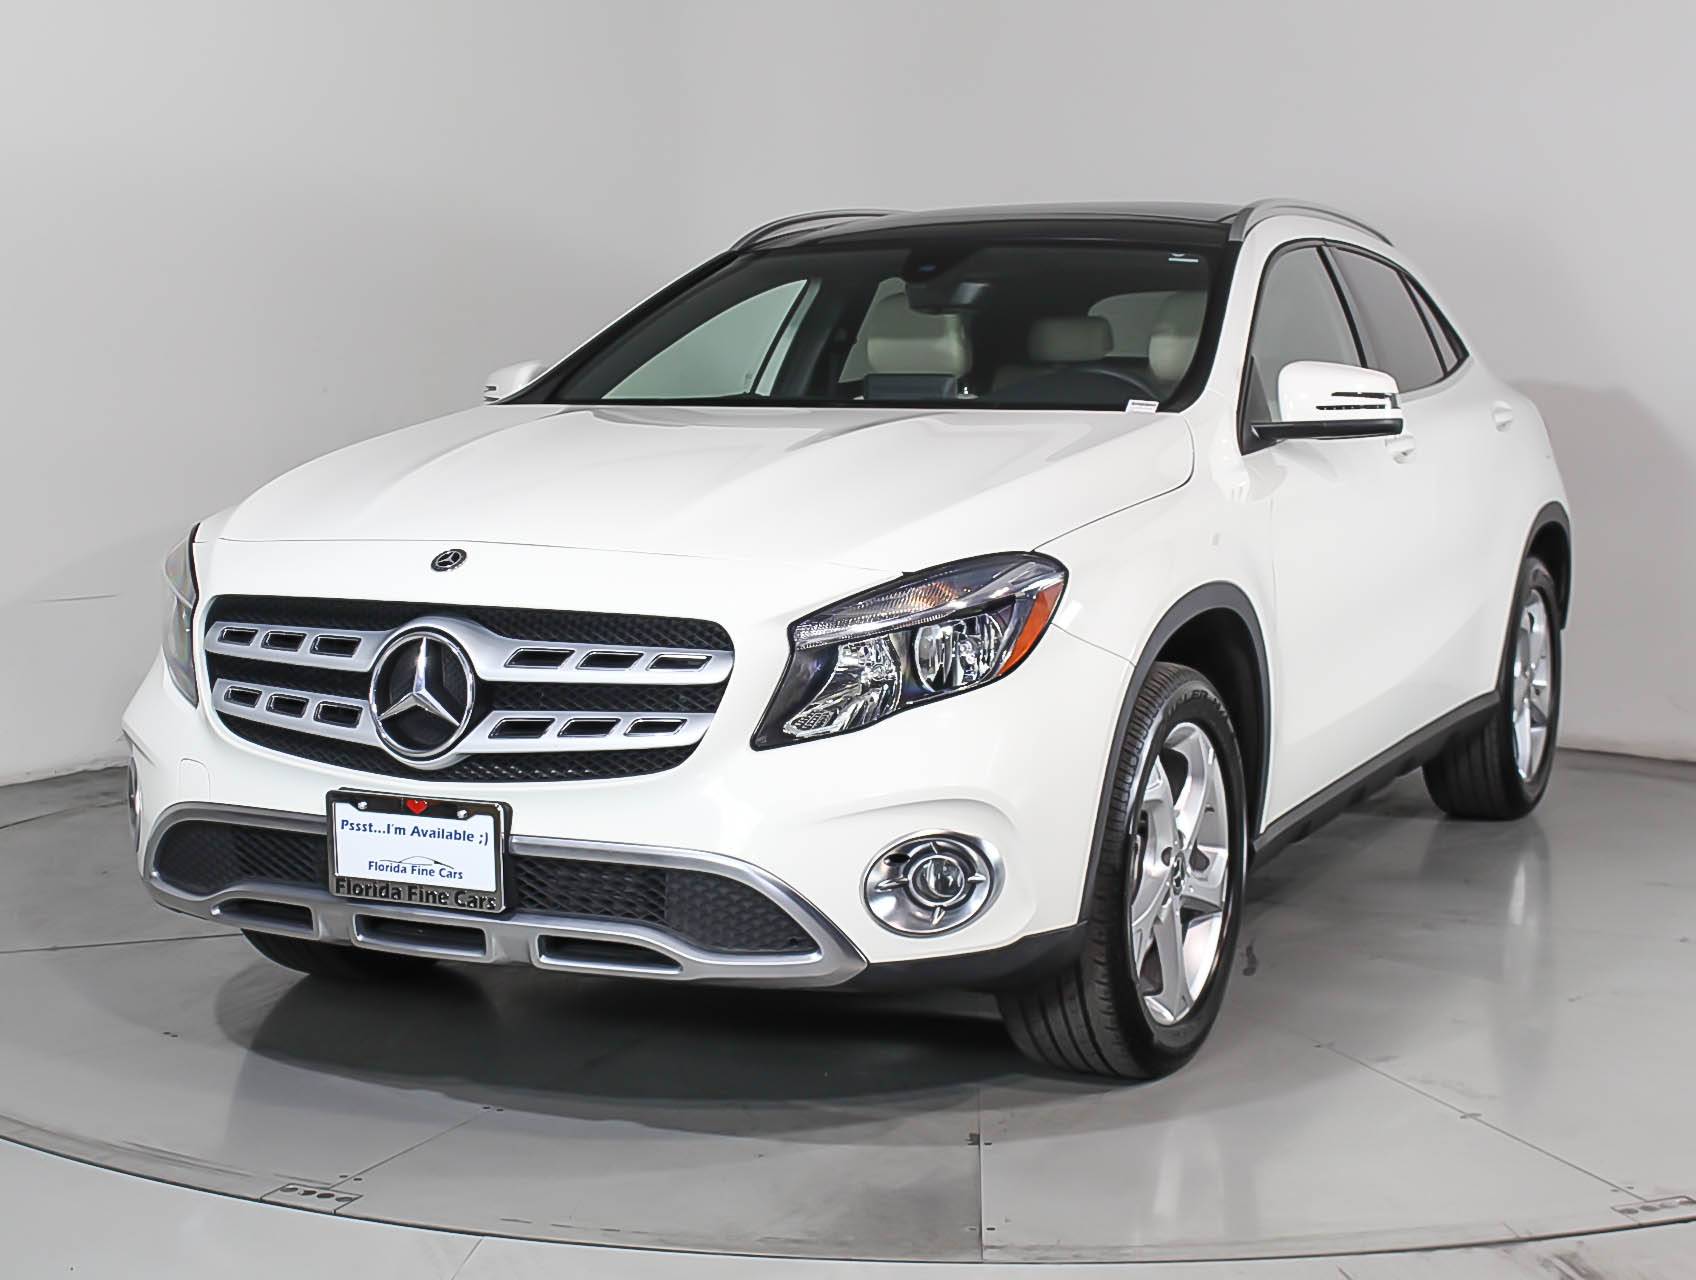 Used 2018 Mercedes Benz Gla Class Gla250 4matic Suv For Sale